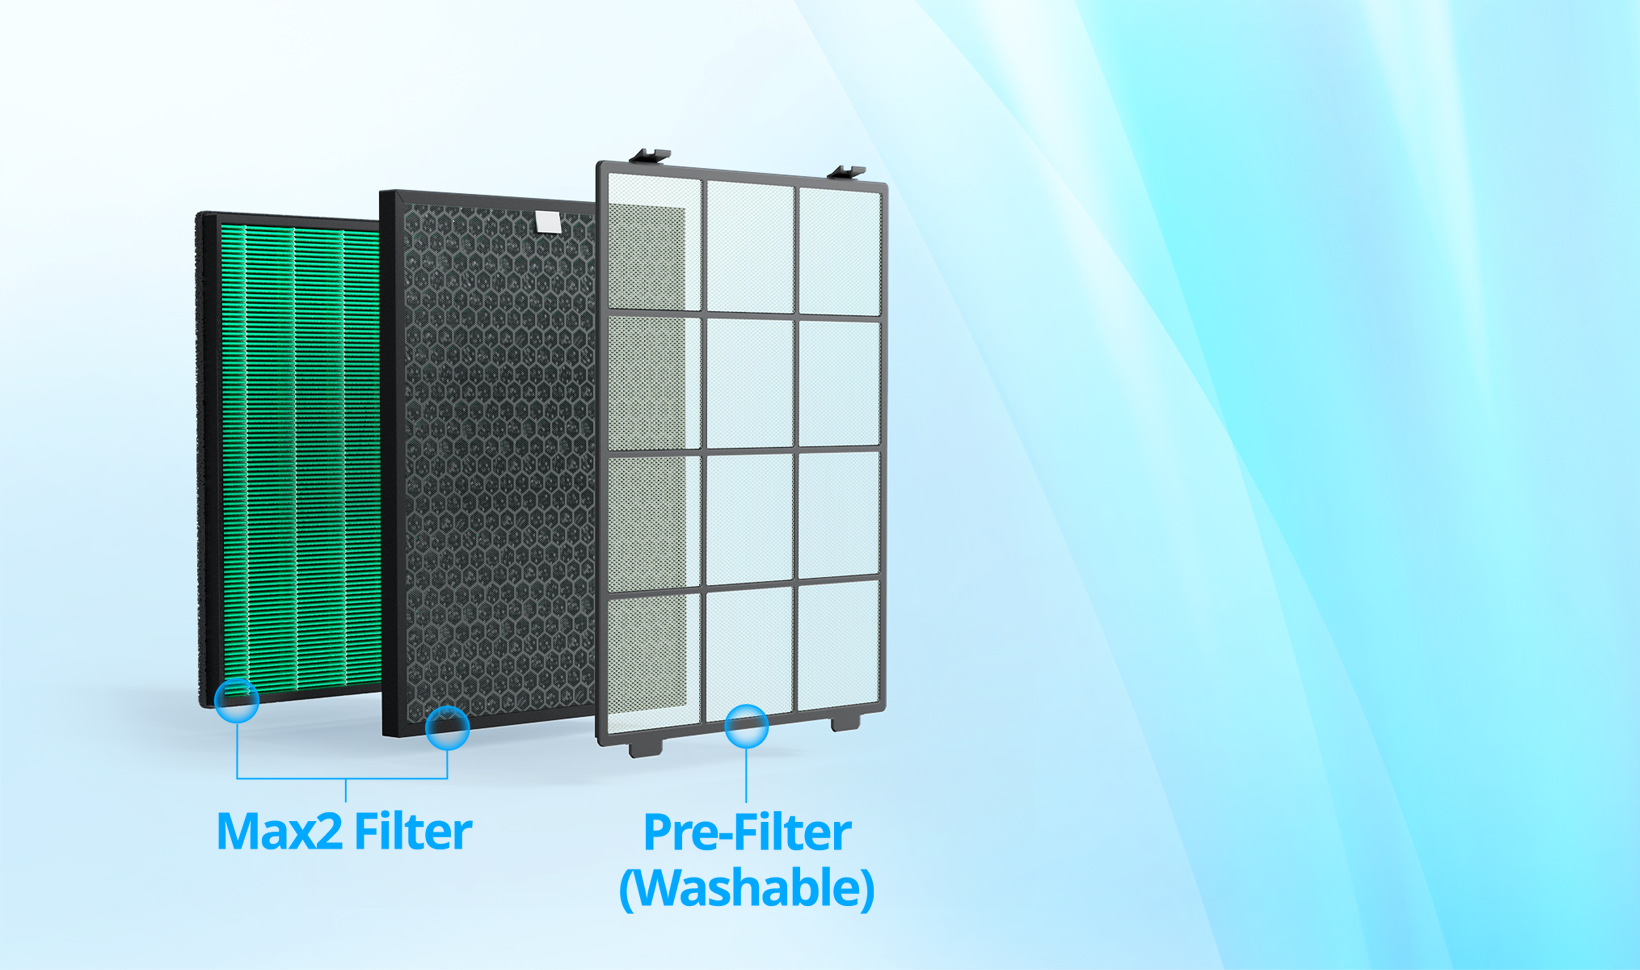 Filter Configuration Image: Max2 Filter + Washable Pre-Filter